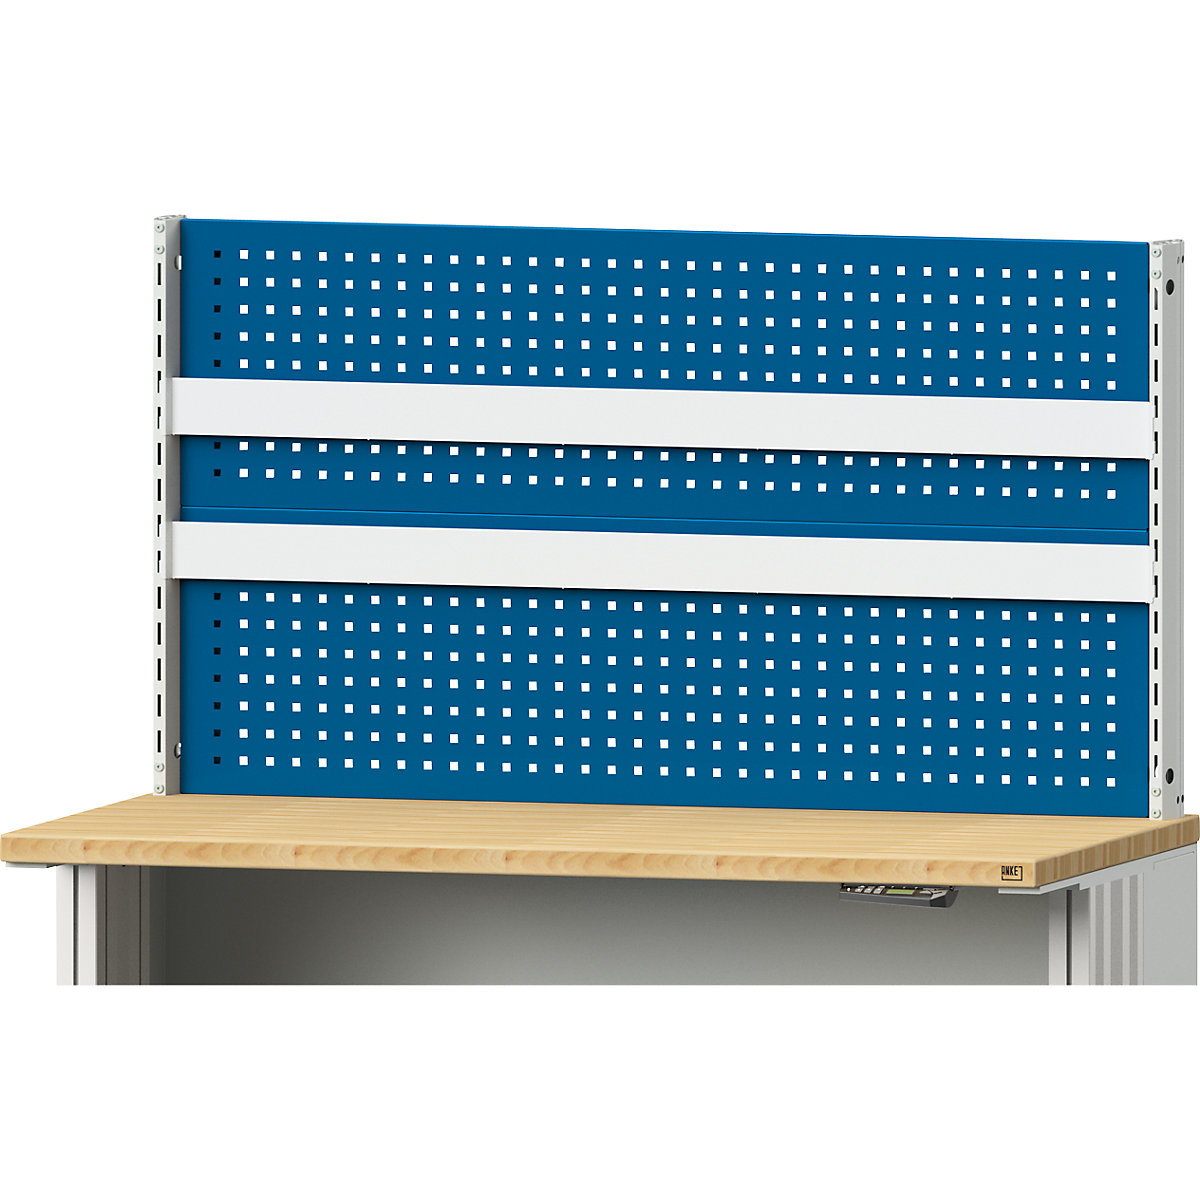 Modular system for electric LIFT work table – ANKE